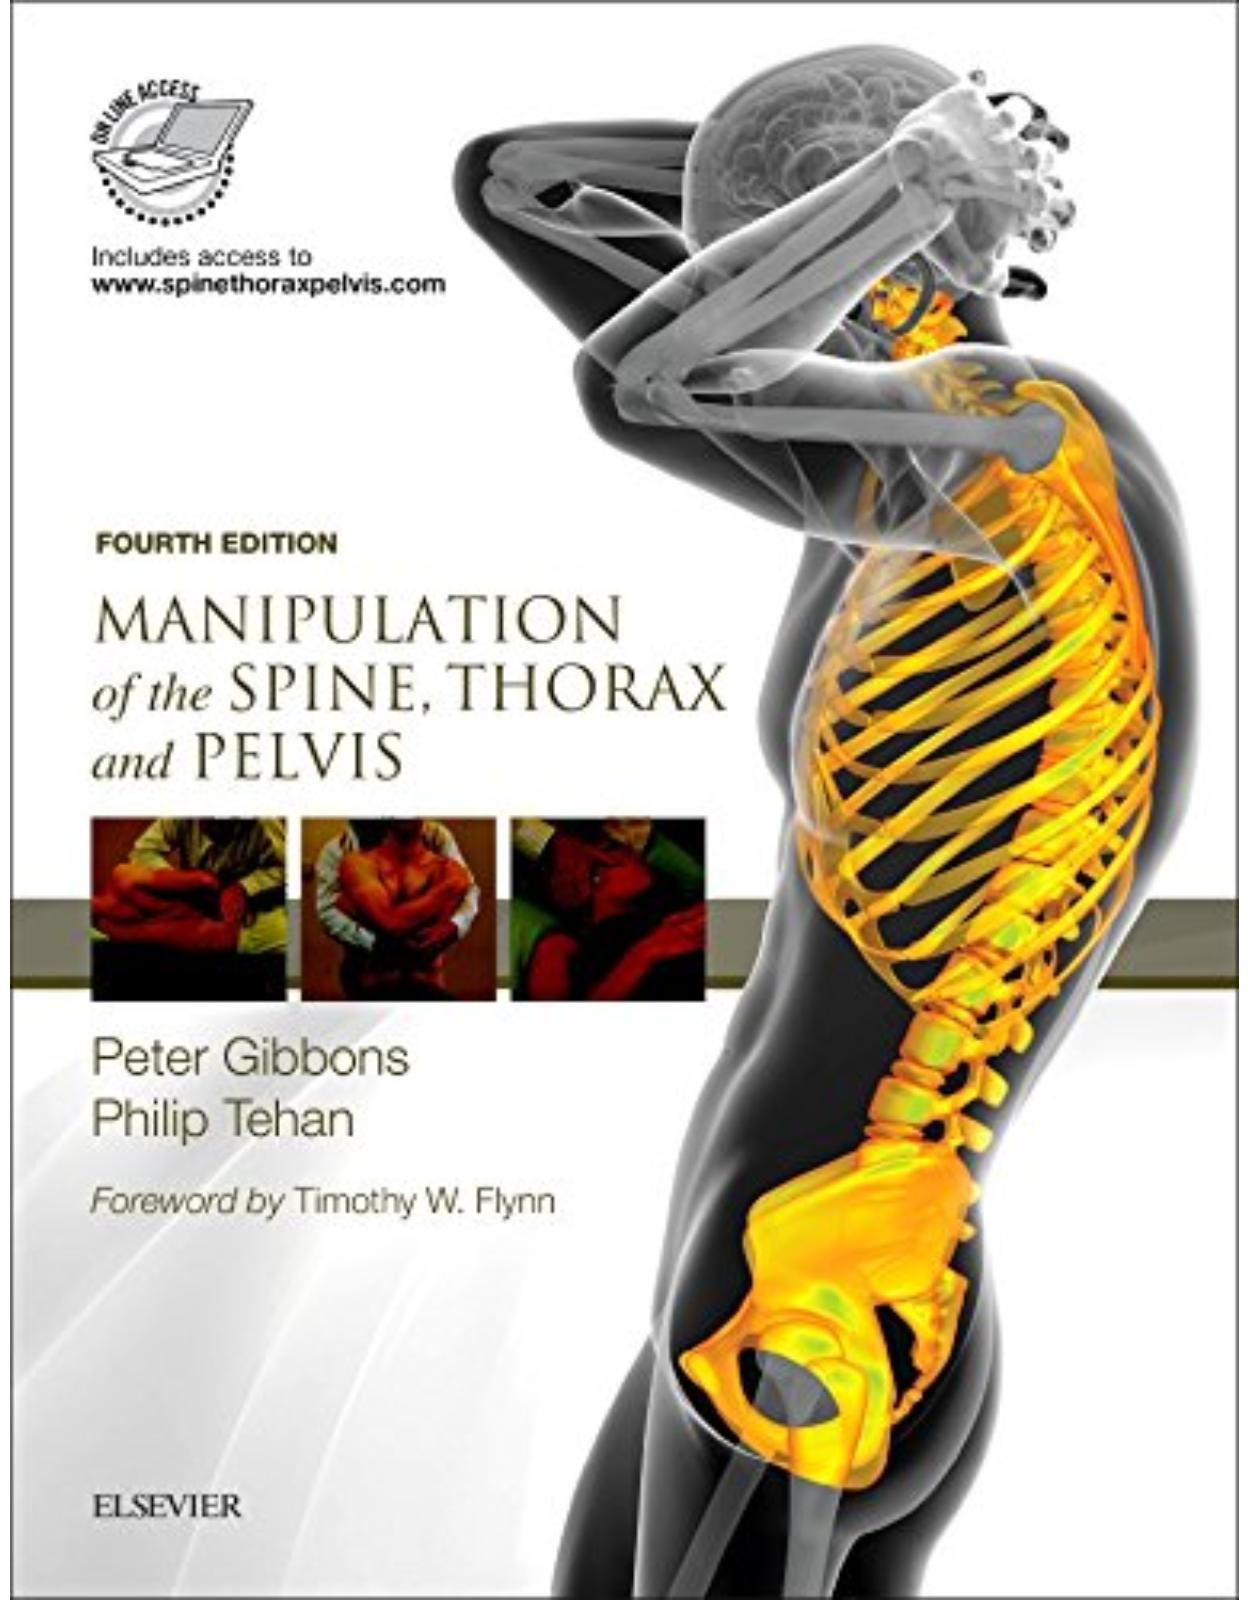 Manipulation of the Spine, Thorax and Pelvis: with access to www.spinethoraxpelvis.com